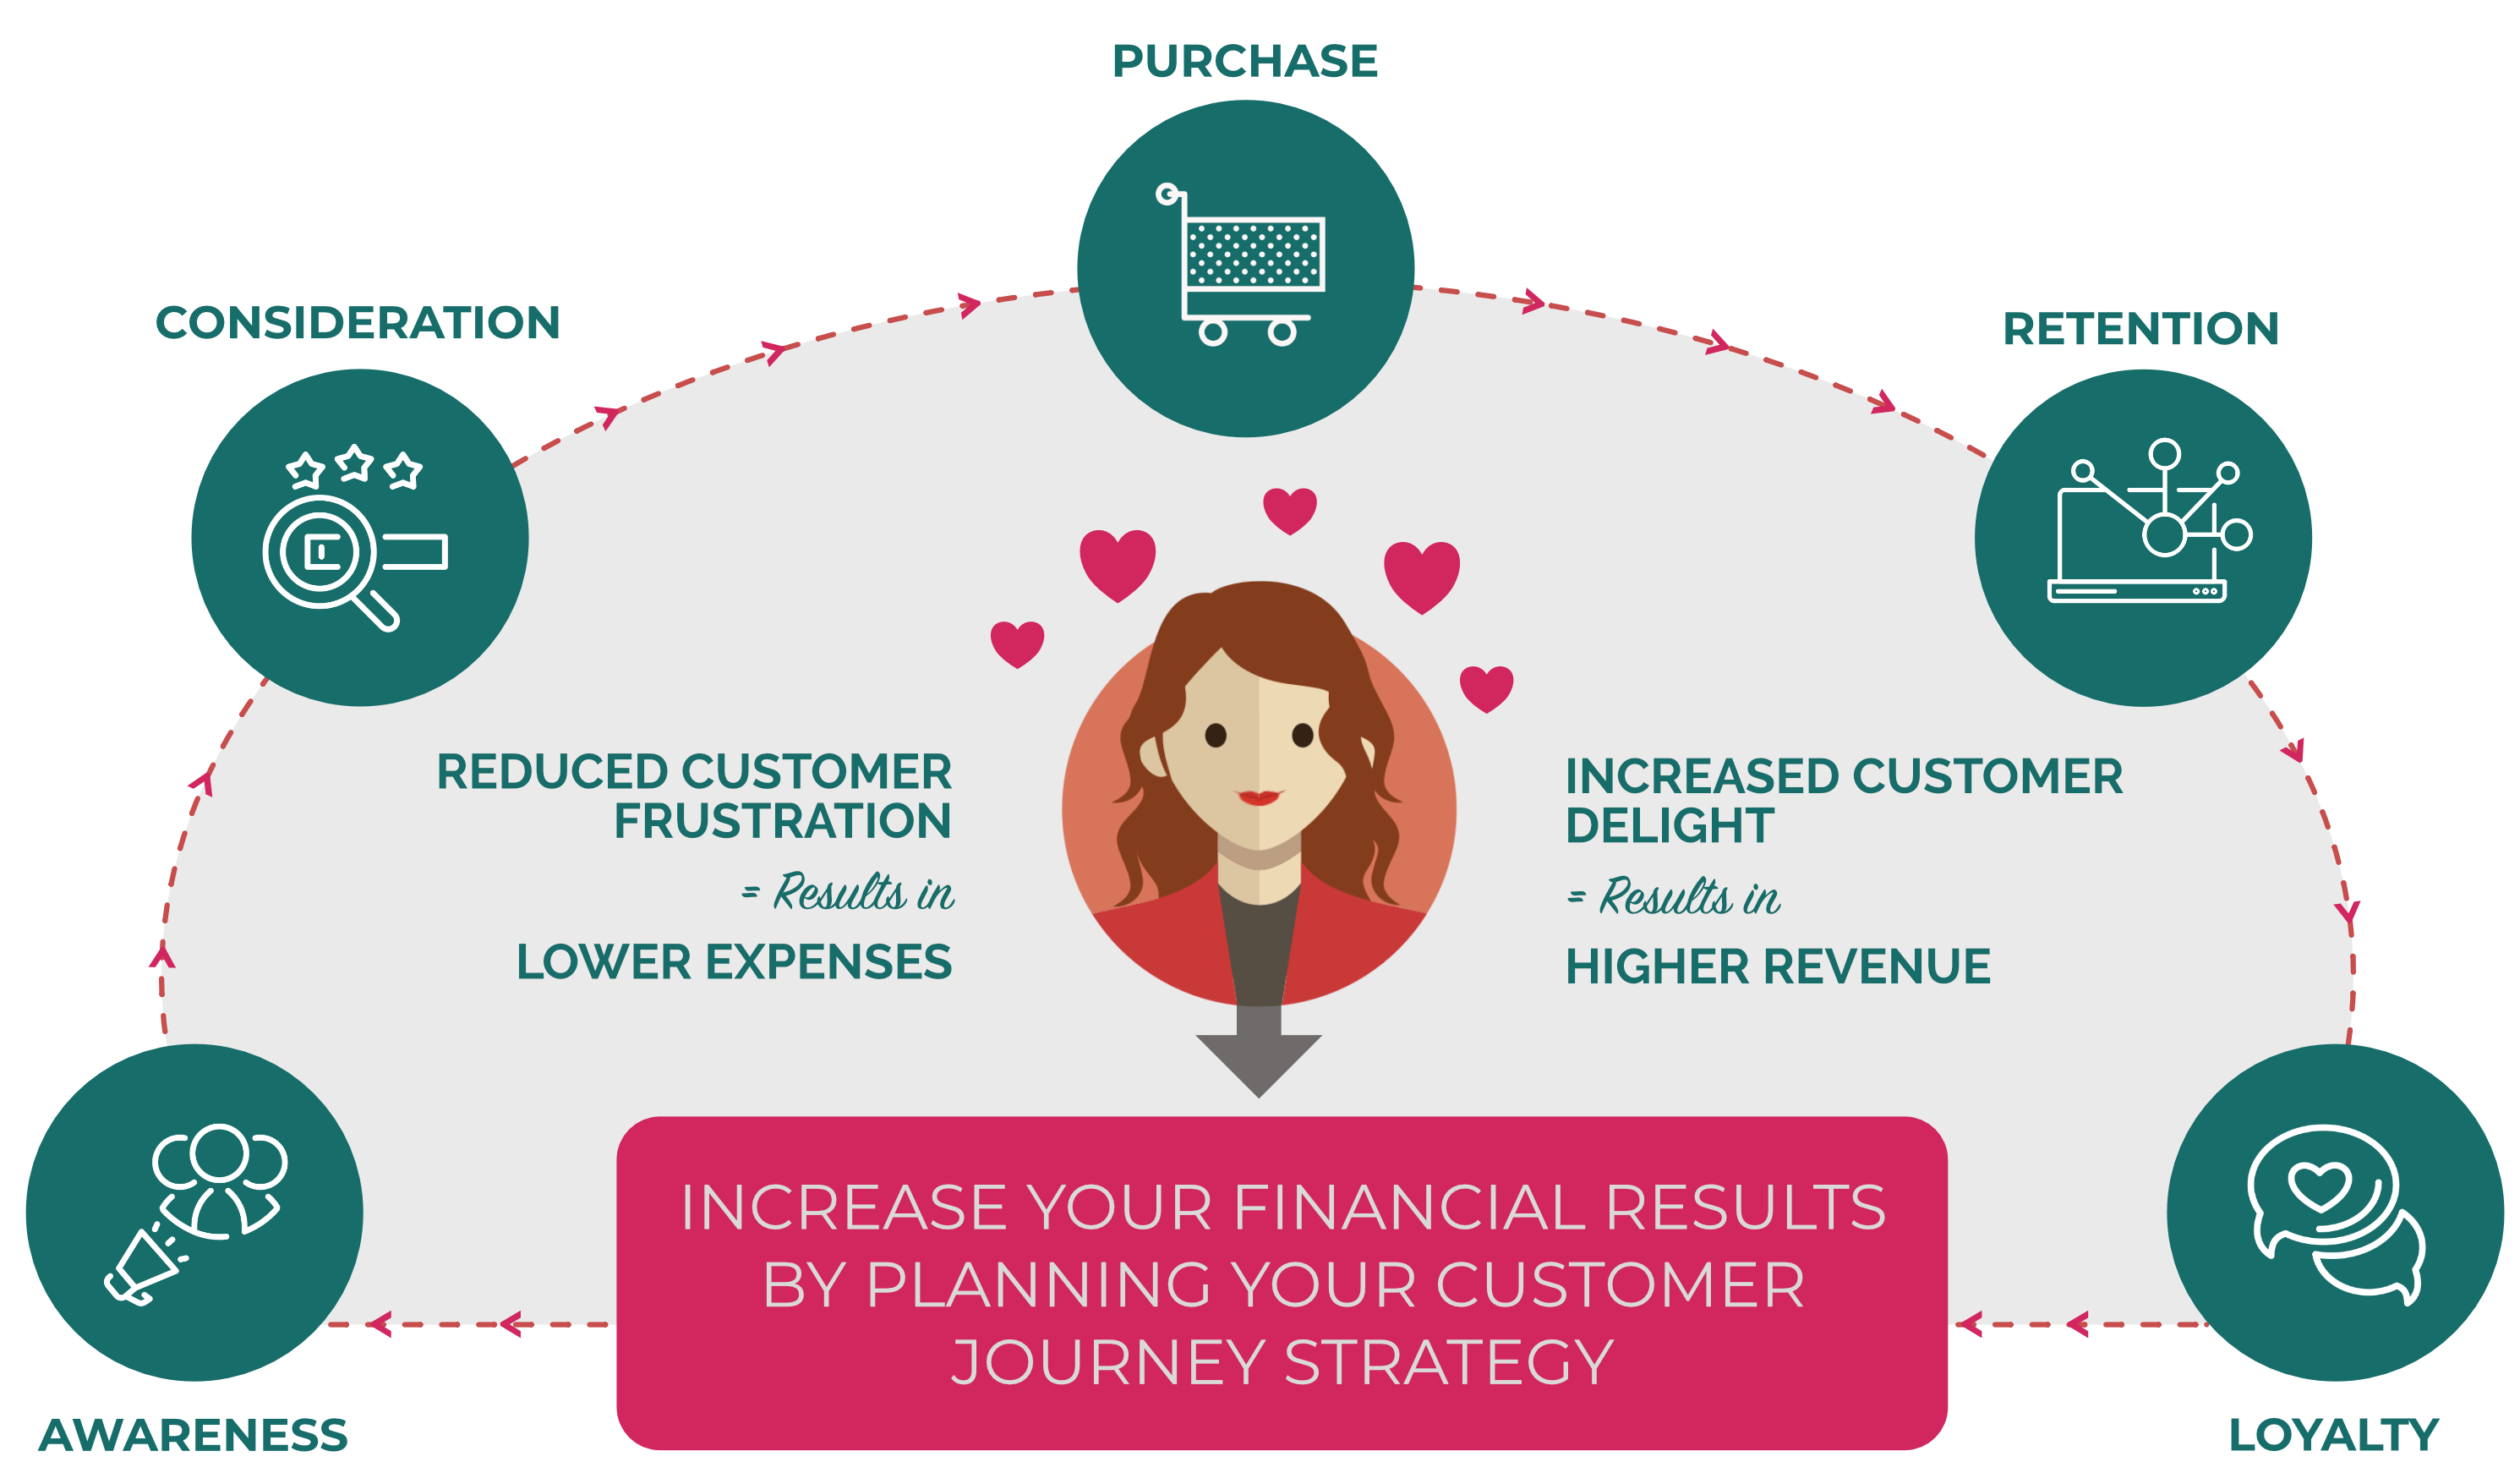 5 Stages of the Customer Journey